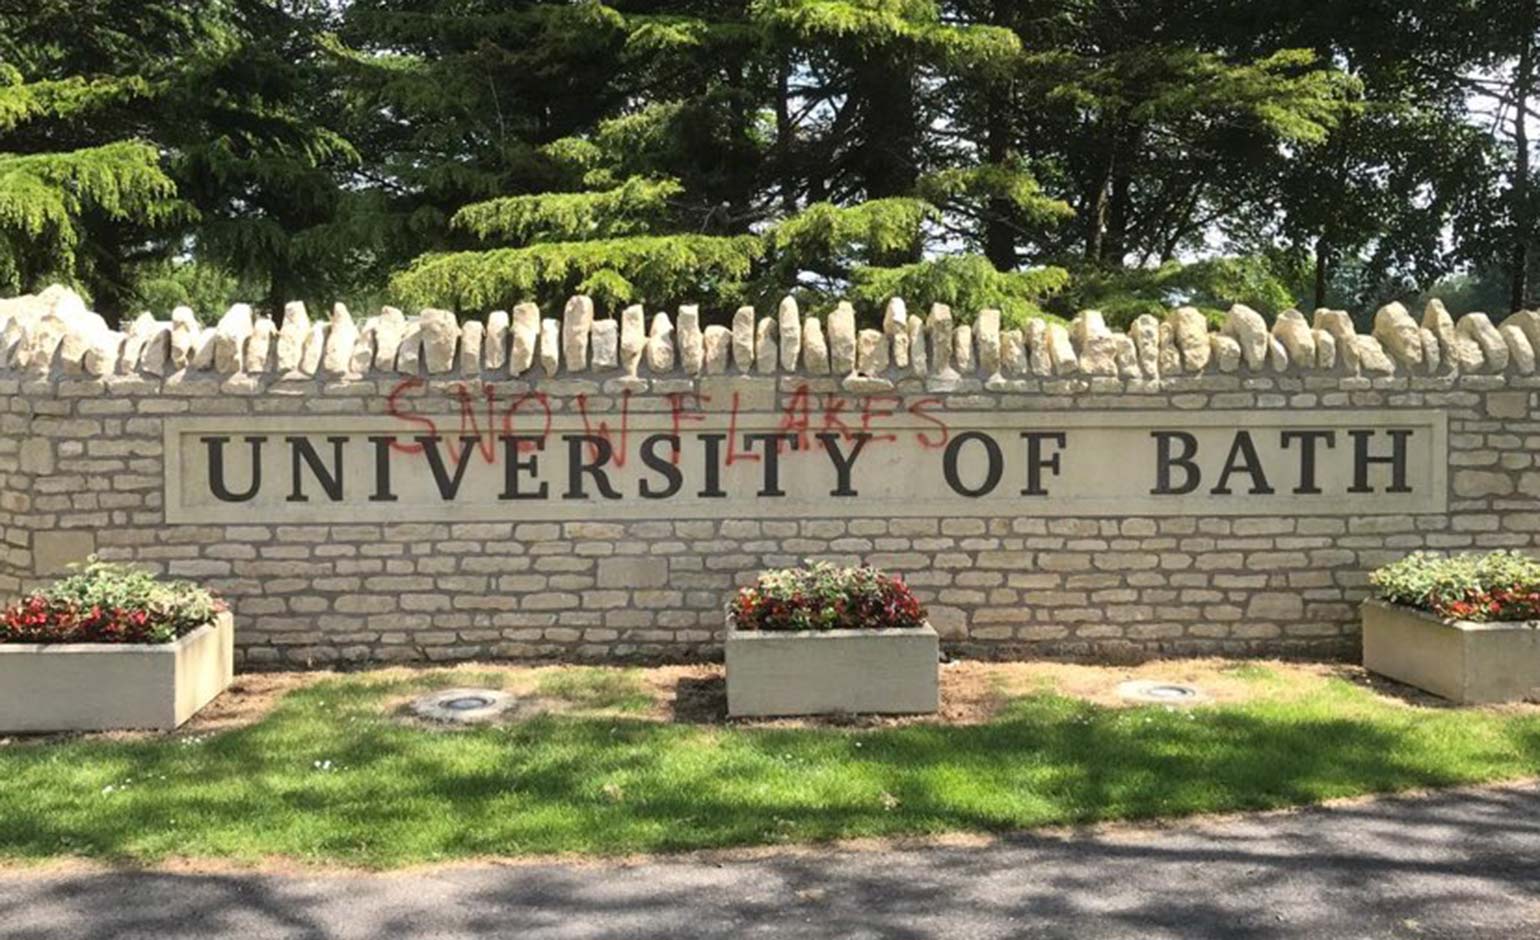 University of Bath 'disappointed' after 'snowflakes' graffitied on entrance  sign | Bath Echo